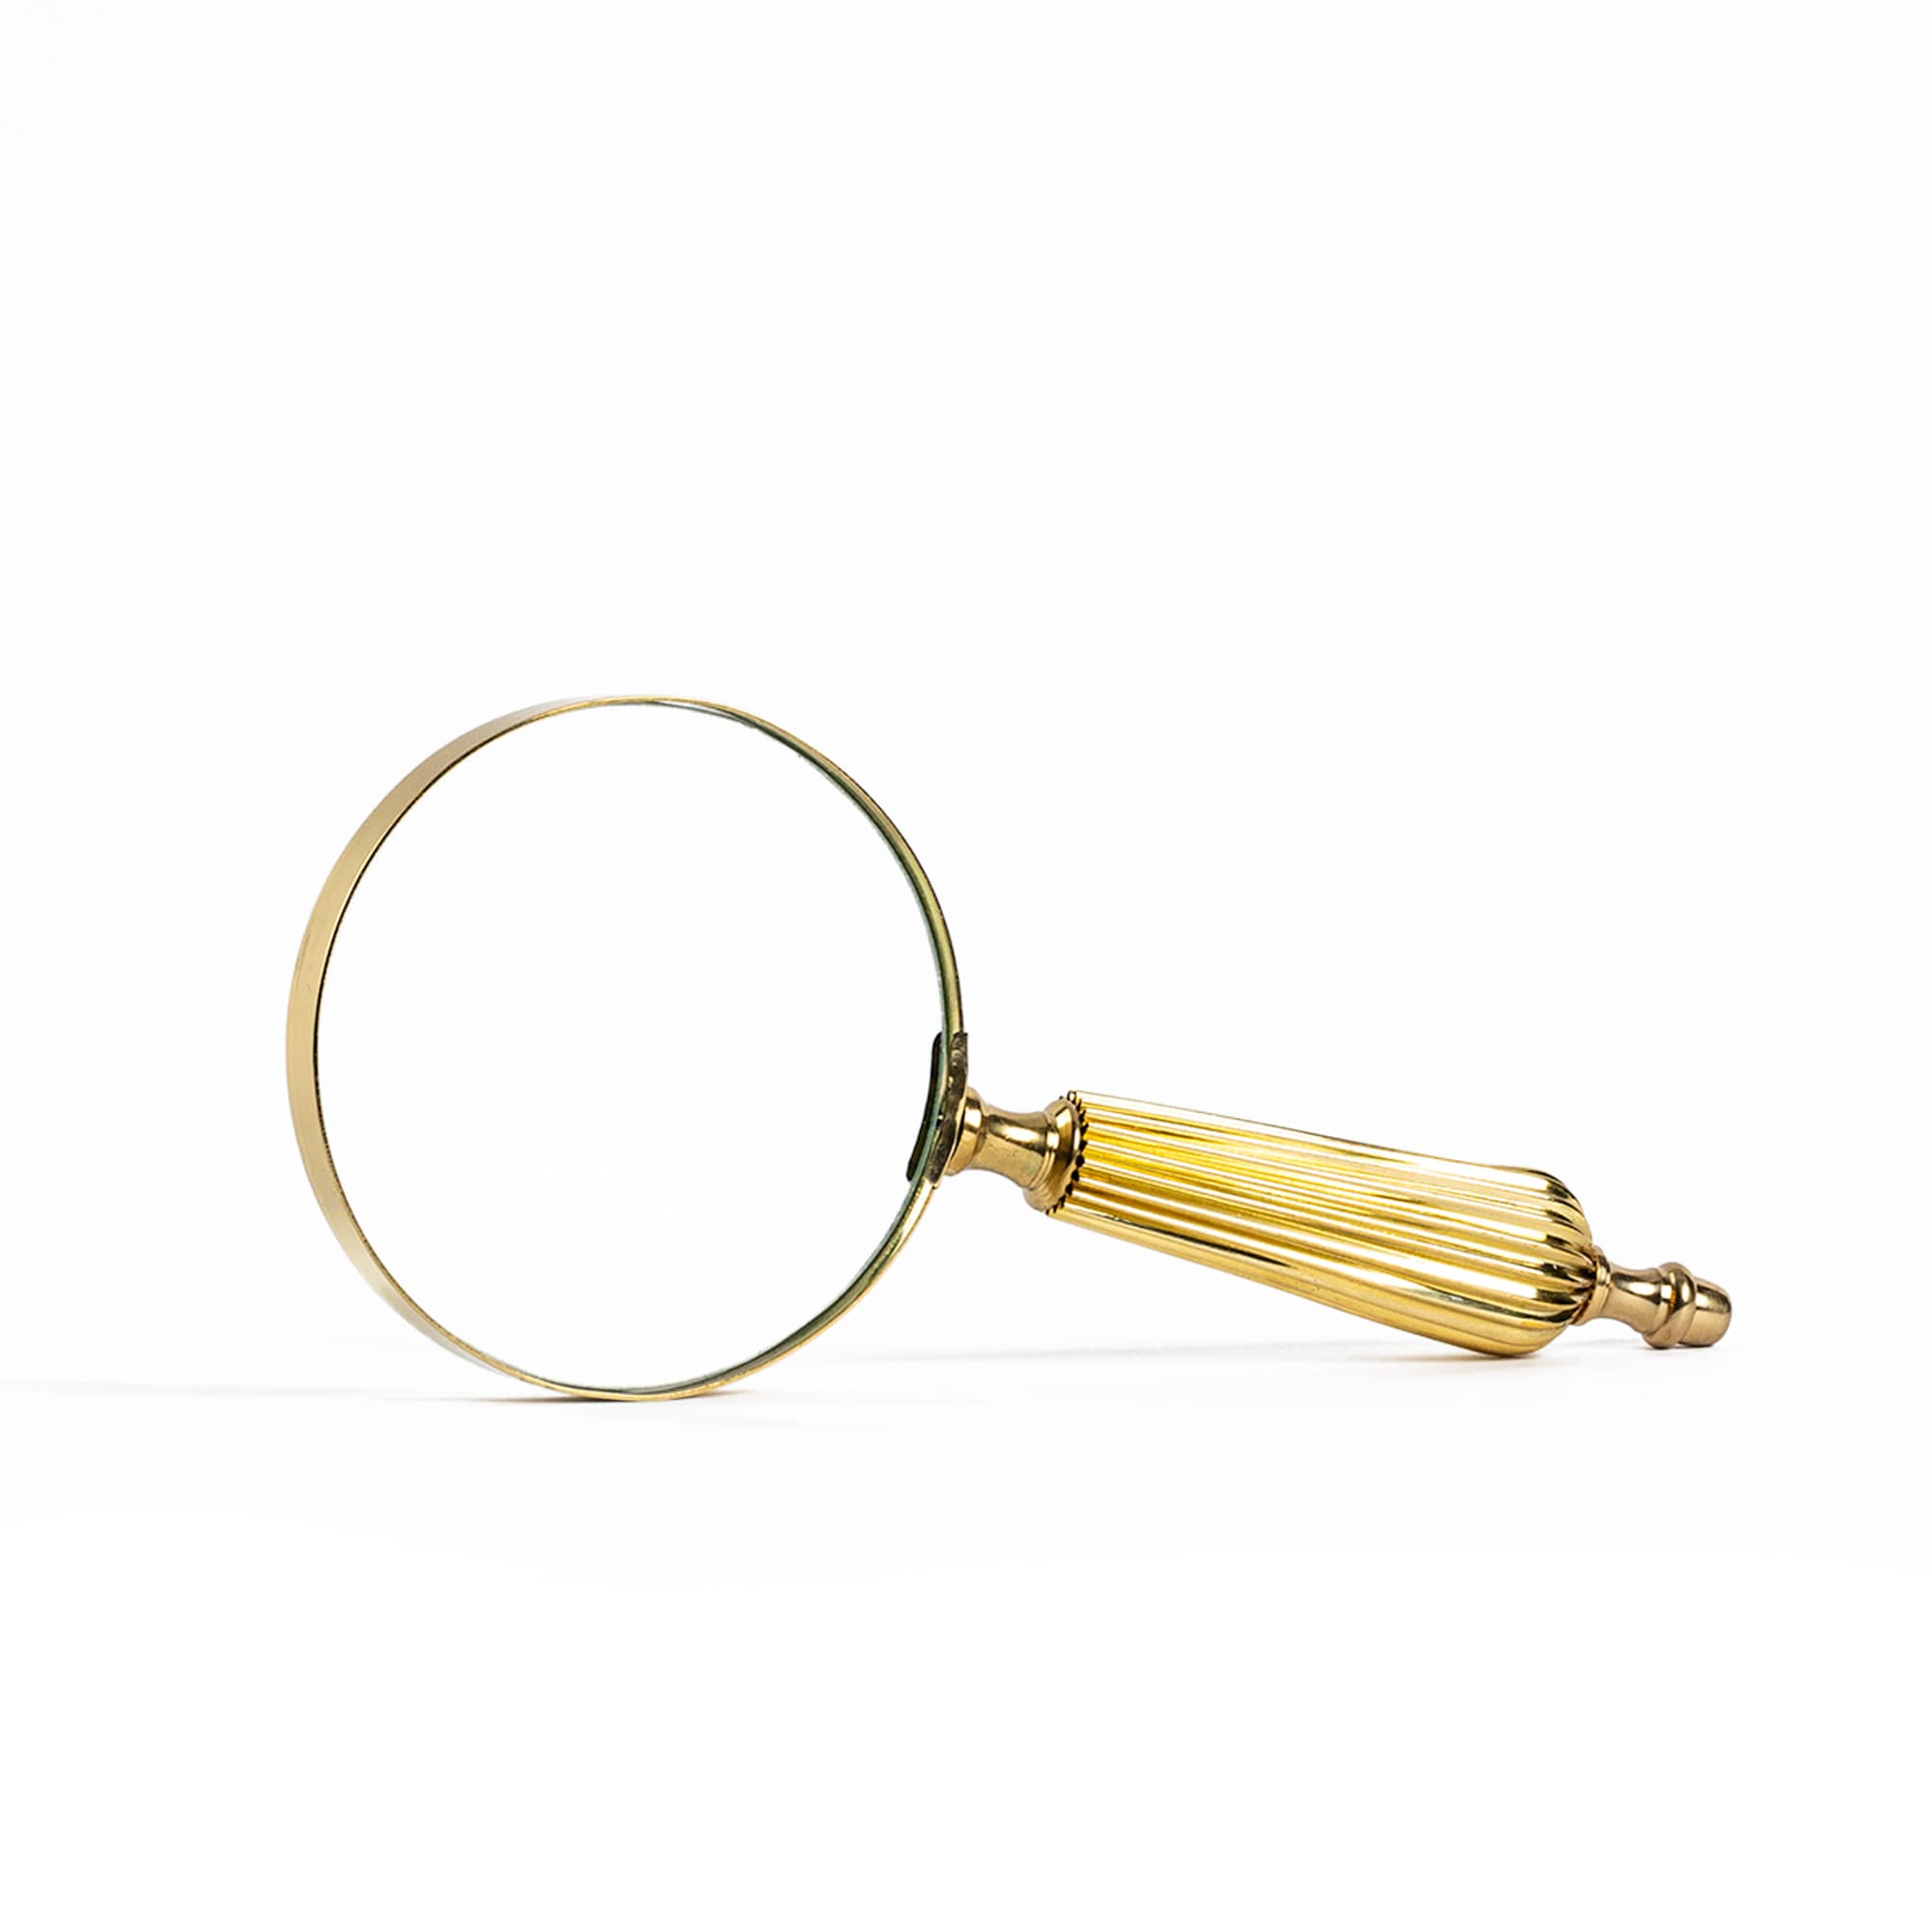 Magnifying glass w/gold handle